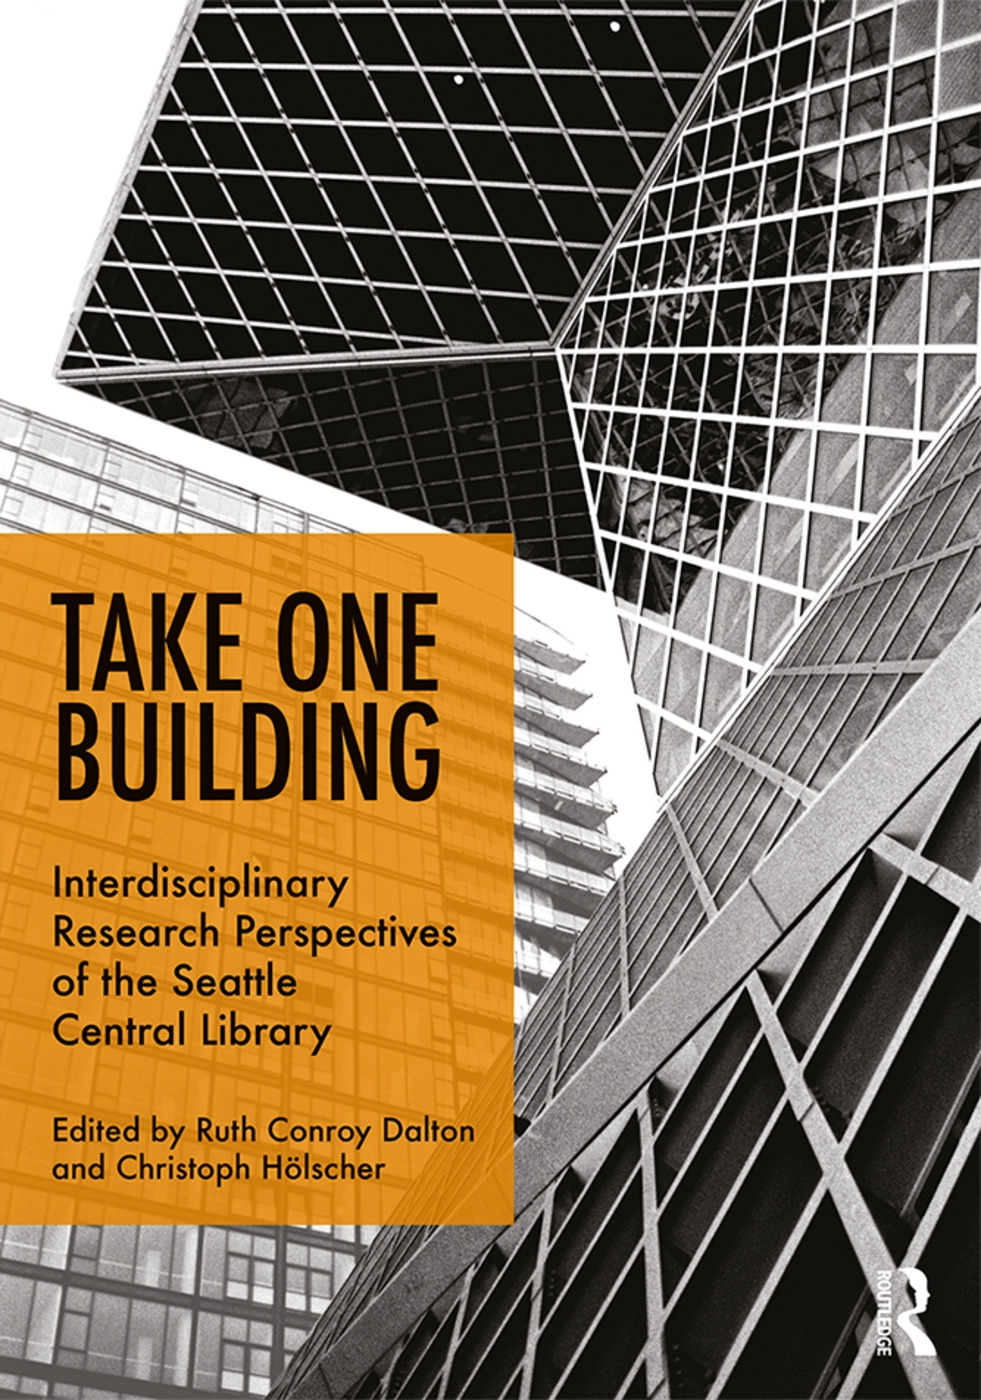 Take One Building: Interdisciplinary Research Perspectives of the Seattle Central Library